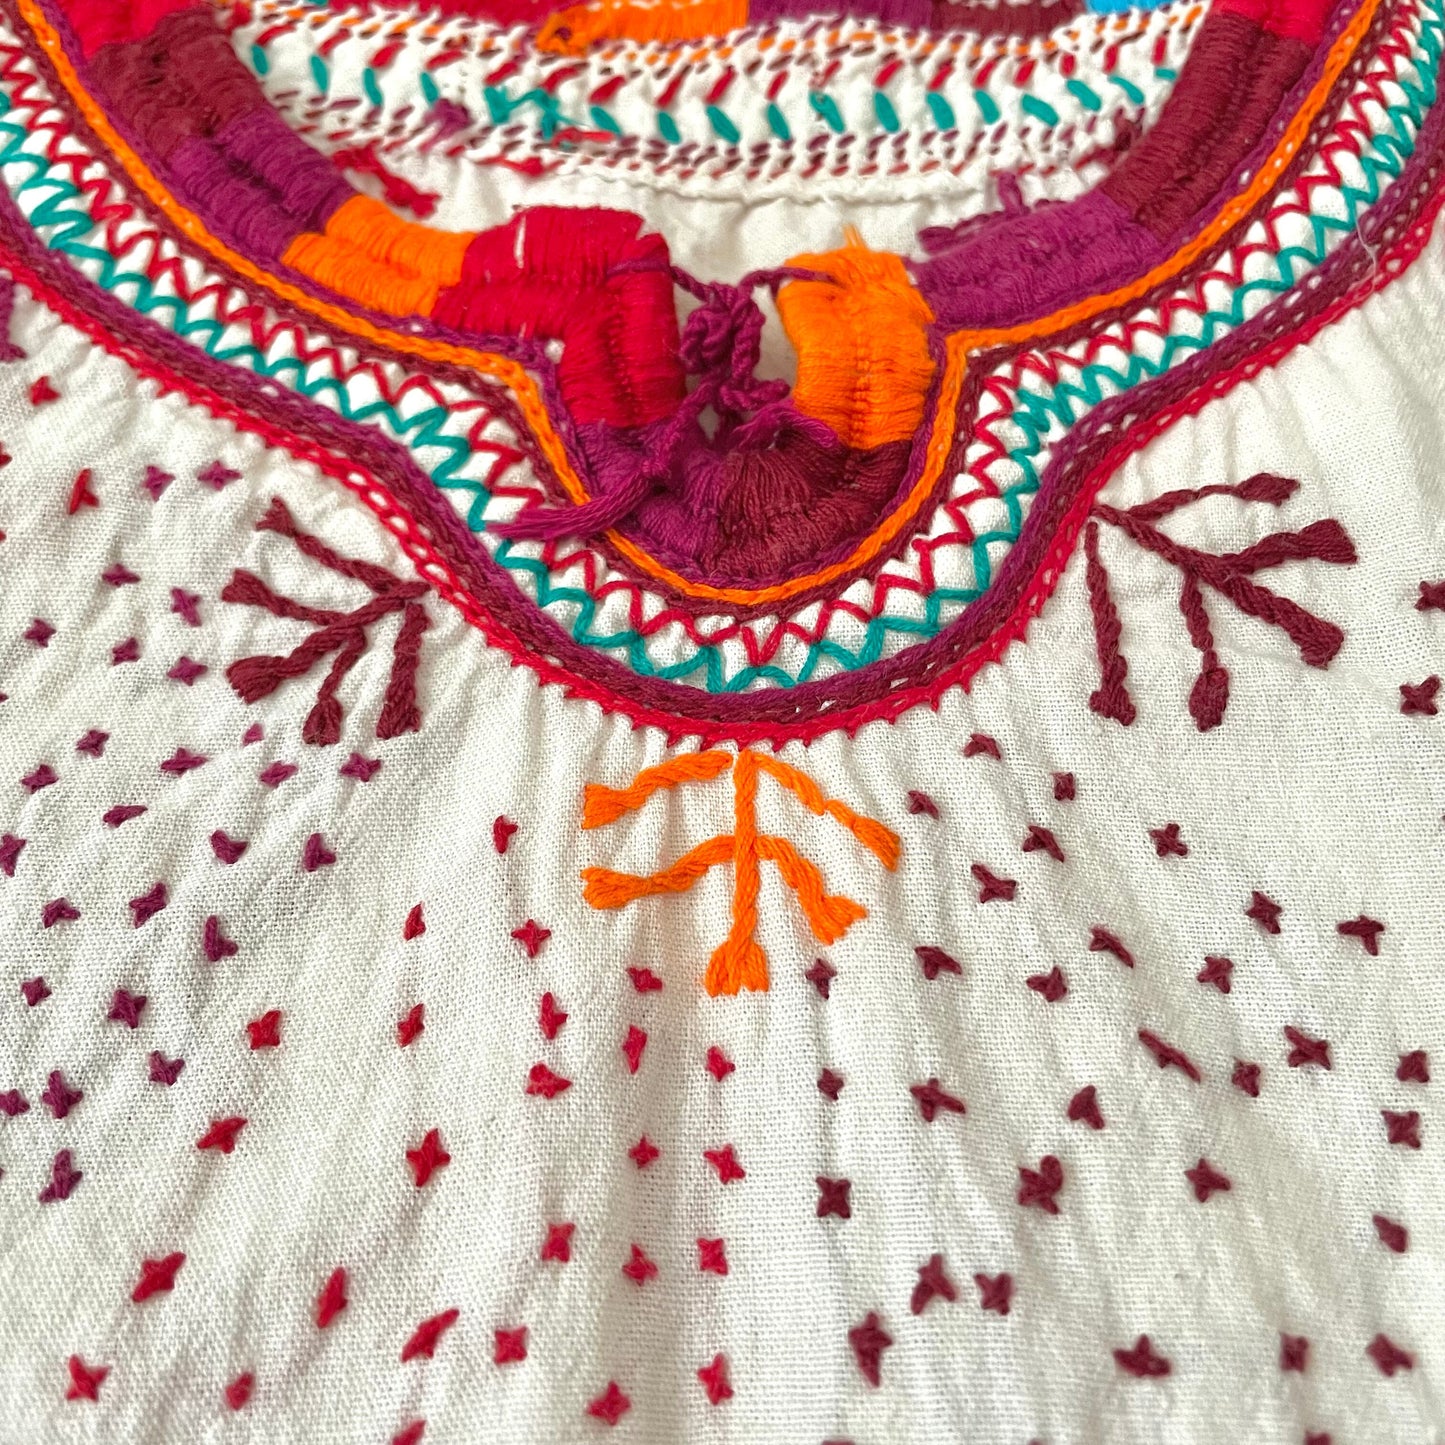 Milpa Embroidely Blouse／メキシコ刺繍  ブラウス